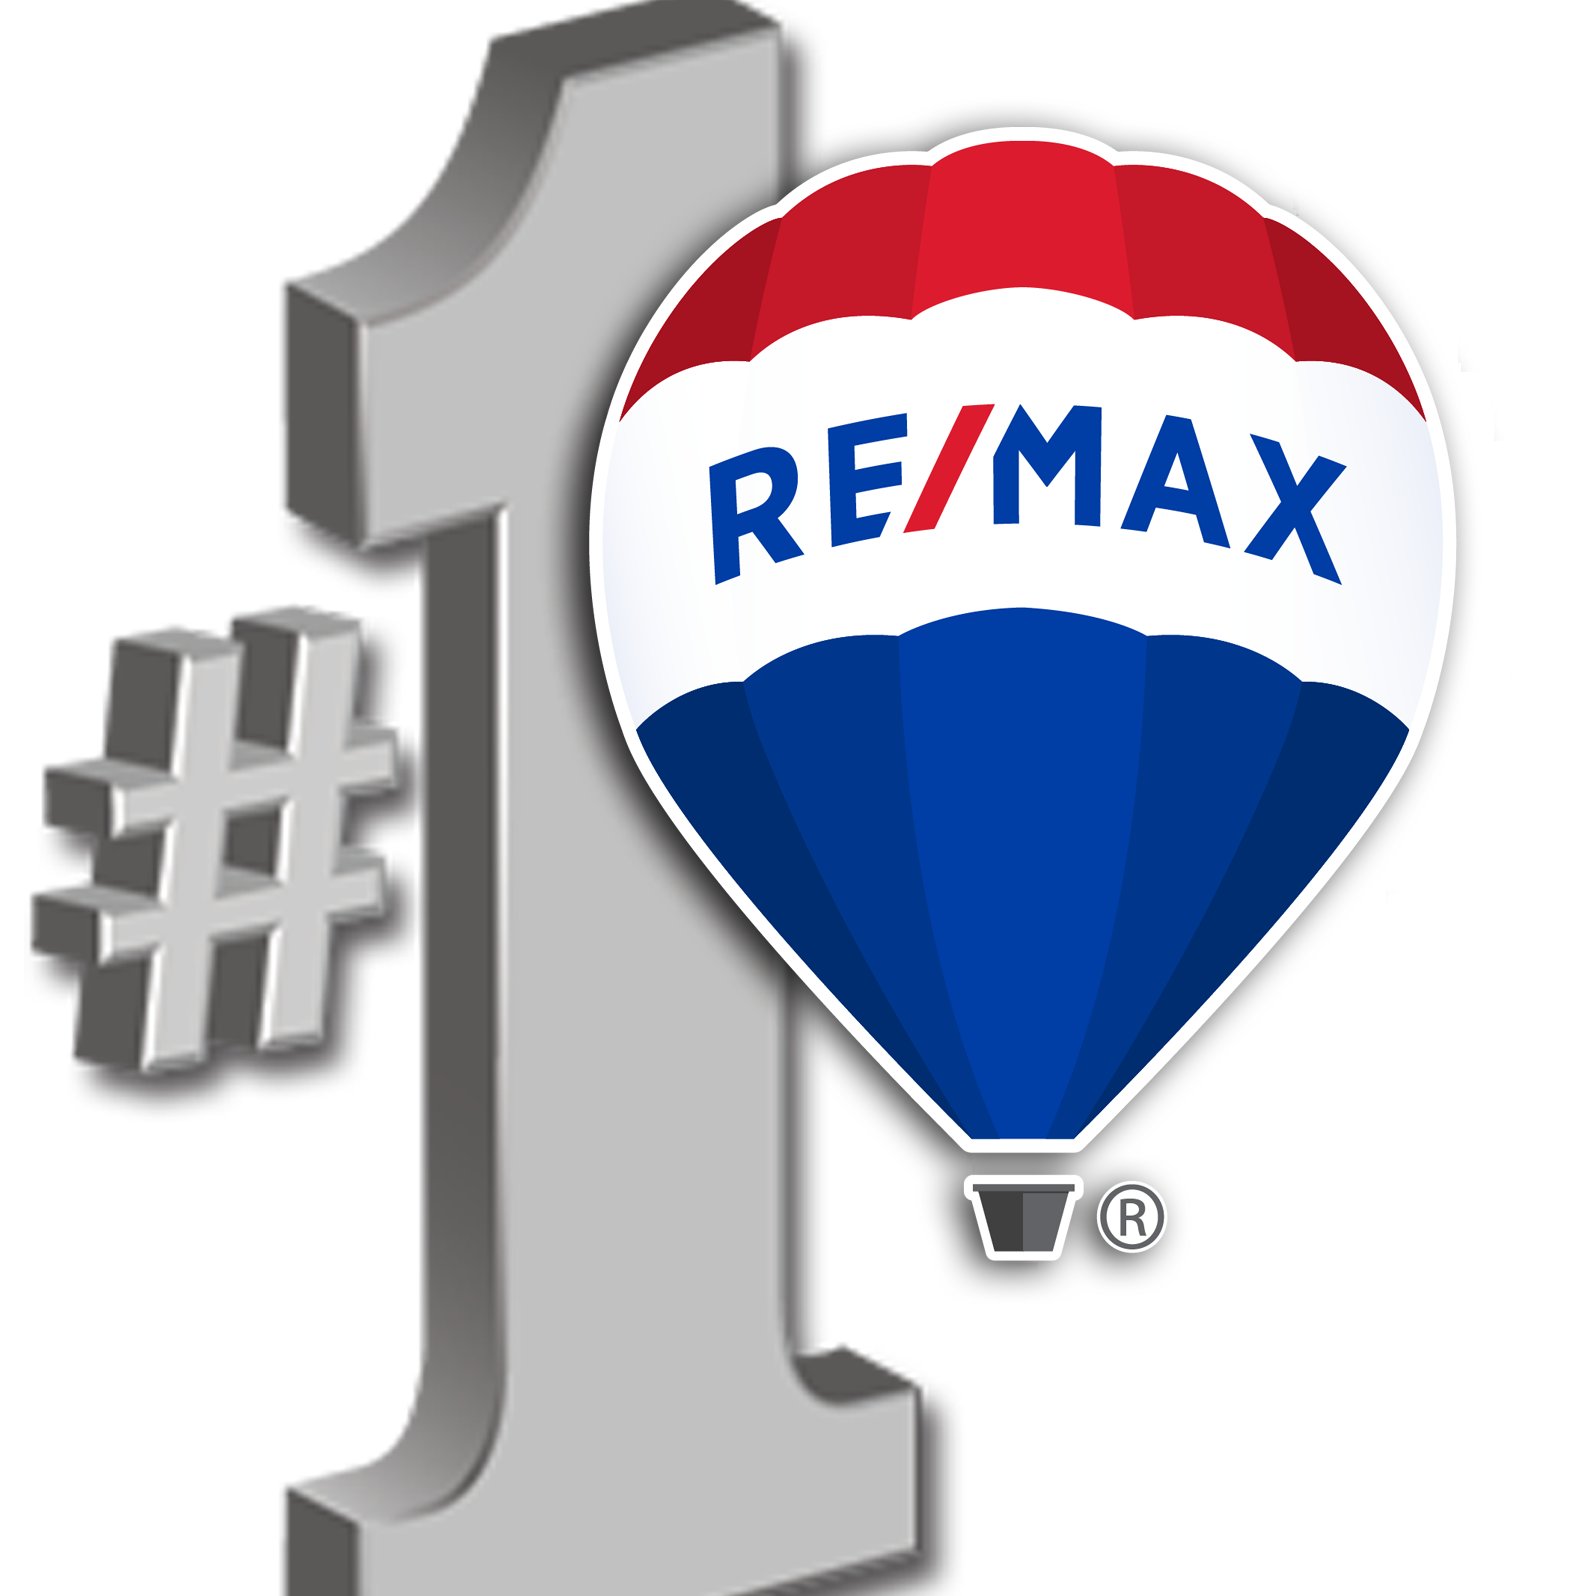 RE/MAX CHAMPIONS is the #1 Office in the TRINITY/PASCO area! Almost $300 Million in Sales Volume over the past 2 years! The office where clients come first!